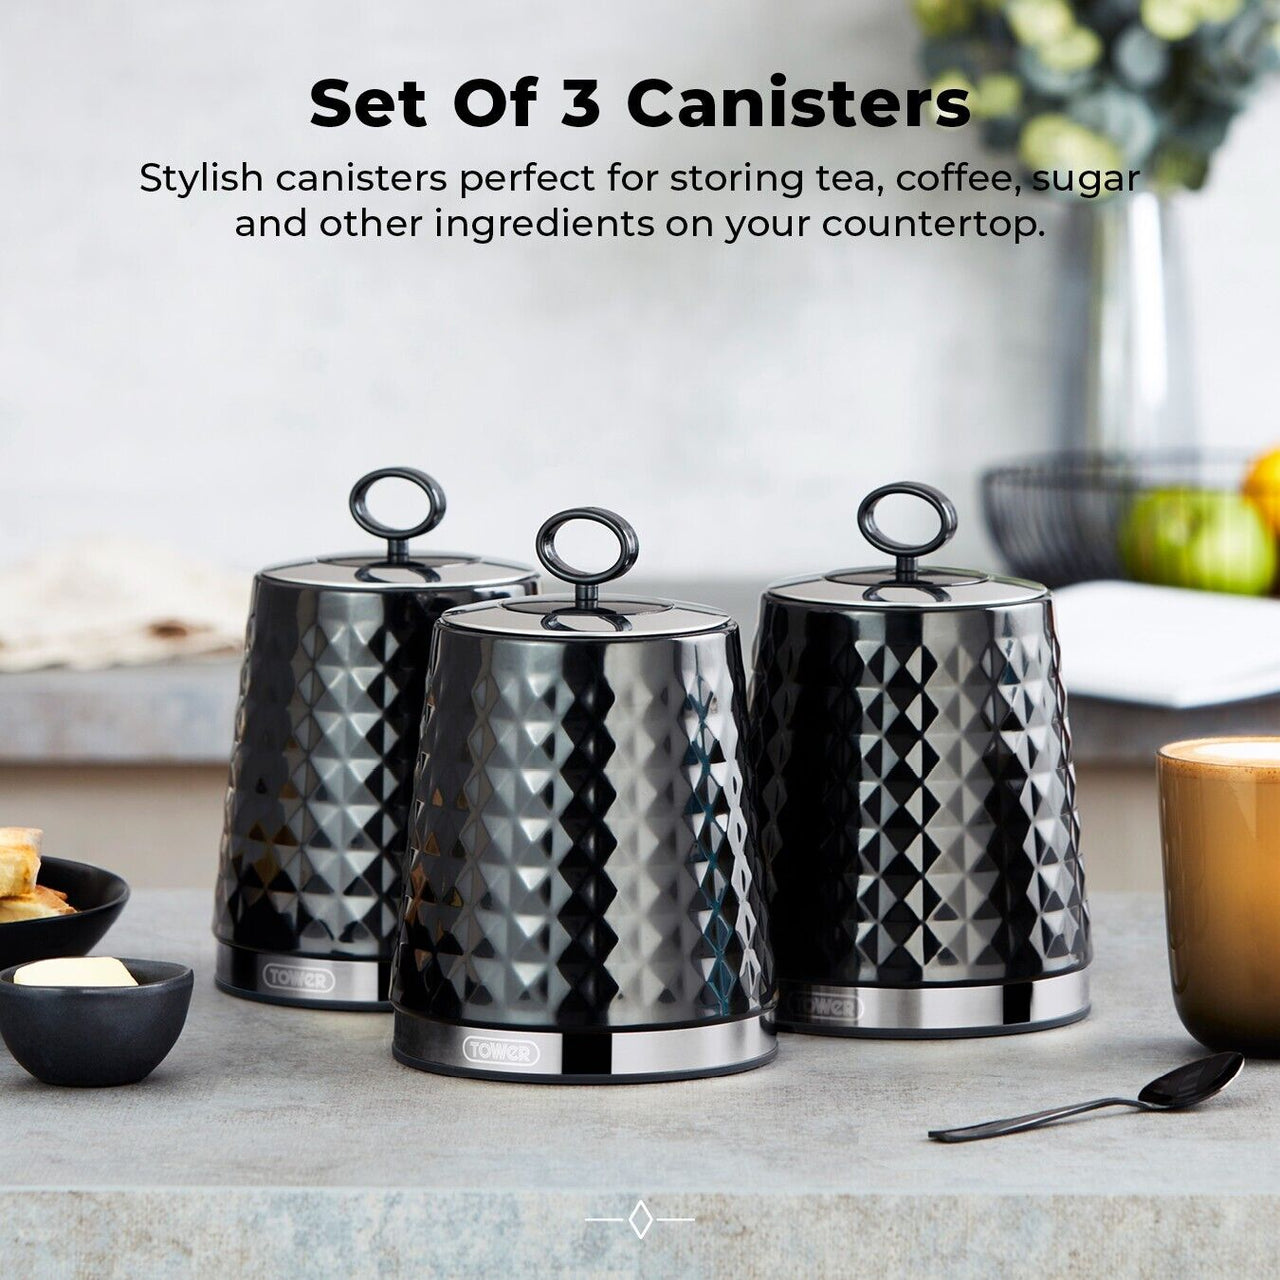 Tower Solitaire Set of 3 Canisters Storage Set Embossed Diamond Design